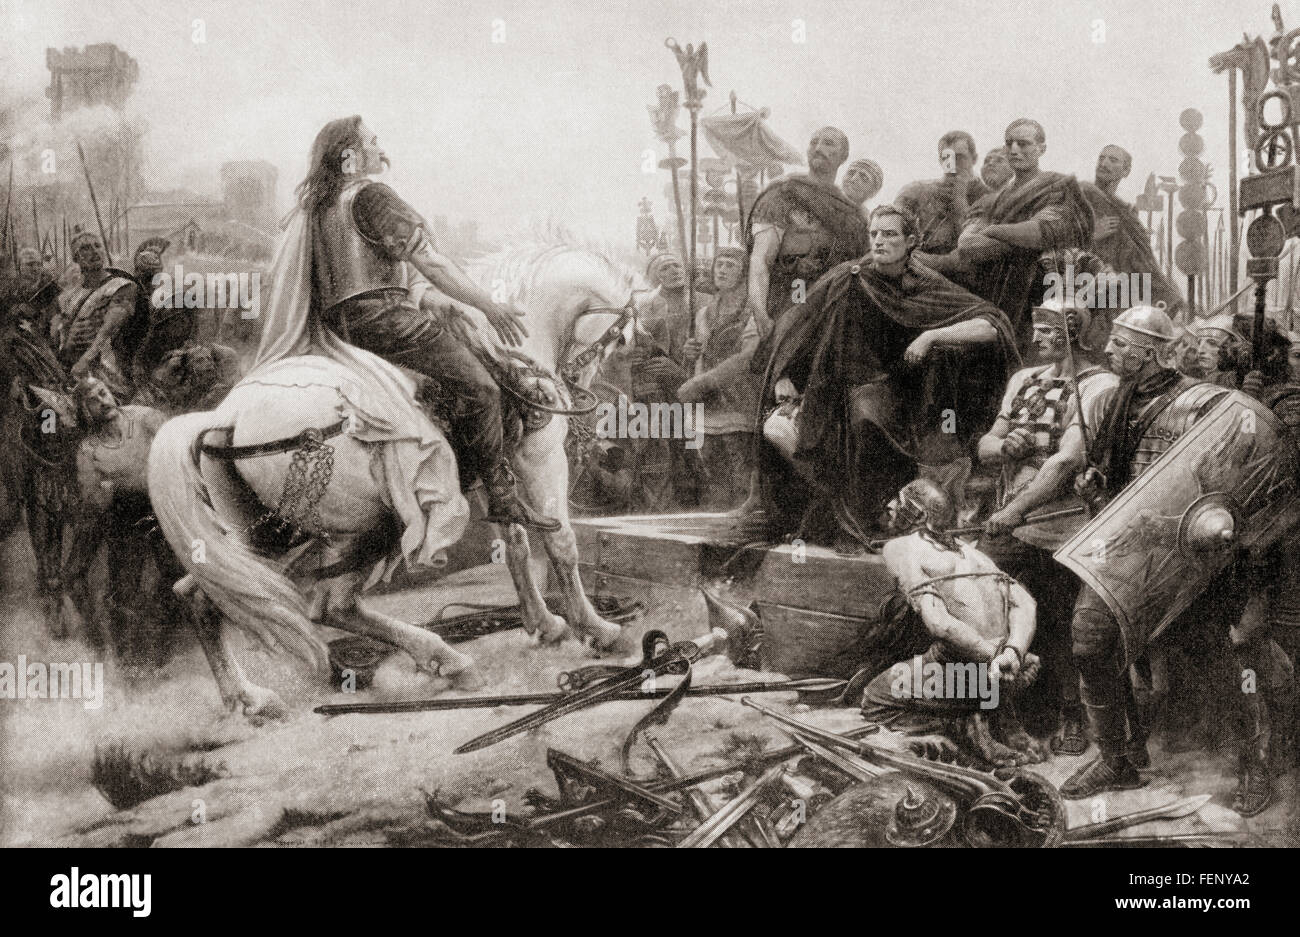 Vercingetorix throws down his arms at the feet of Julius Caesar, 52 BC.  After this he was imprisoned in the Tullianum in Rome for five years, before being publicly displayed in Caesar's triumph in 46 BC. He was executed after the triumph, probably by strangulation in his prison.  Vercingetorix, c. 82 BC – 46 BC.  Chieftain of the Arverni tribe. Stock Photo